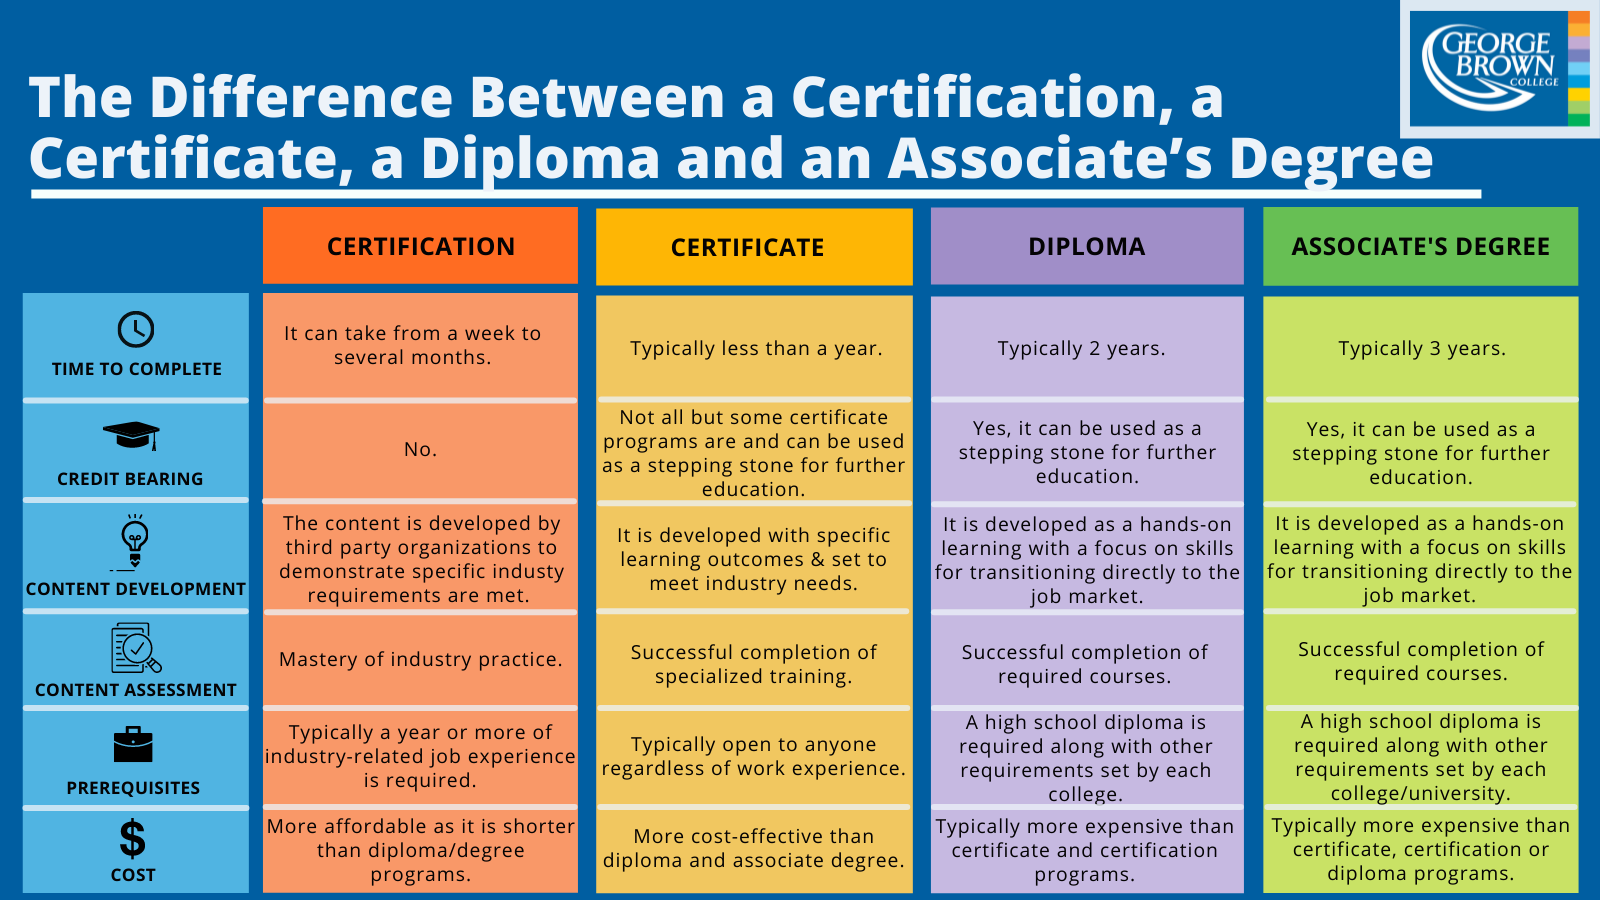 The Difference Between Certification Vs Certificate Vs Diploma Vs Associate’s Degree Chart 6 